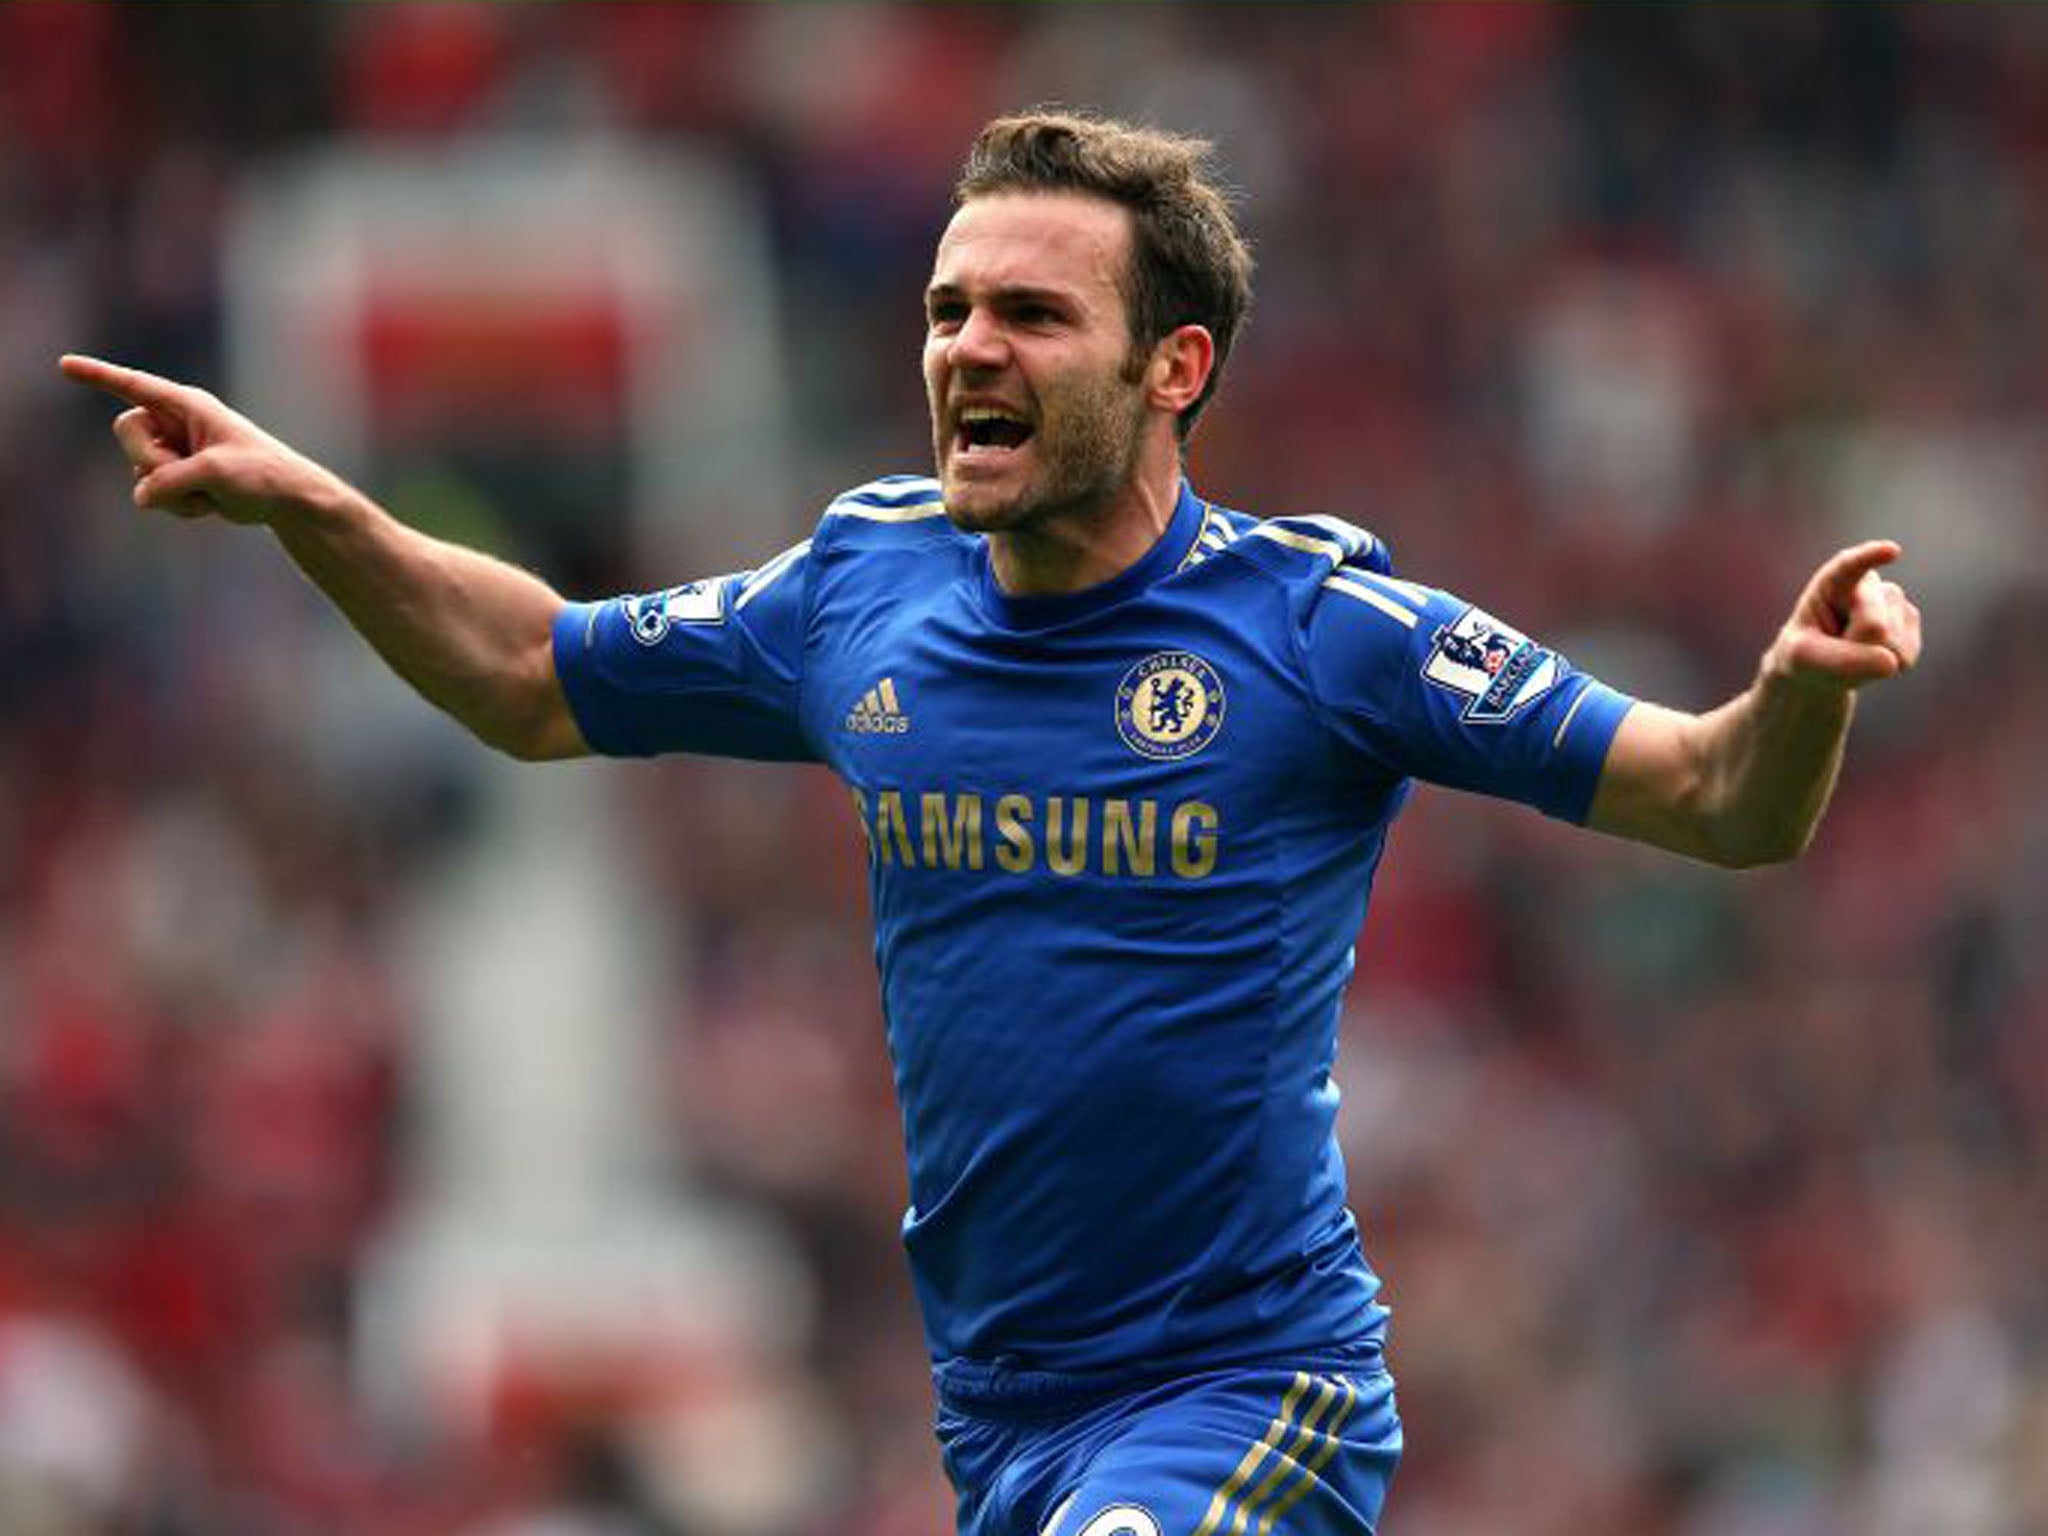 Juan Mata of Chelsea celebrates after scoring the winning goal (Alex Livesey/Getty Images)